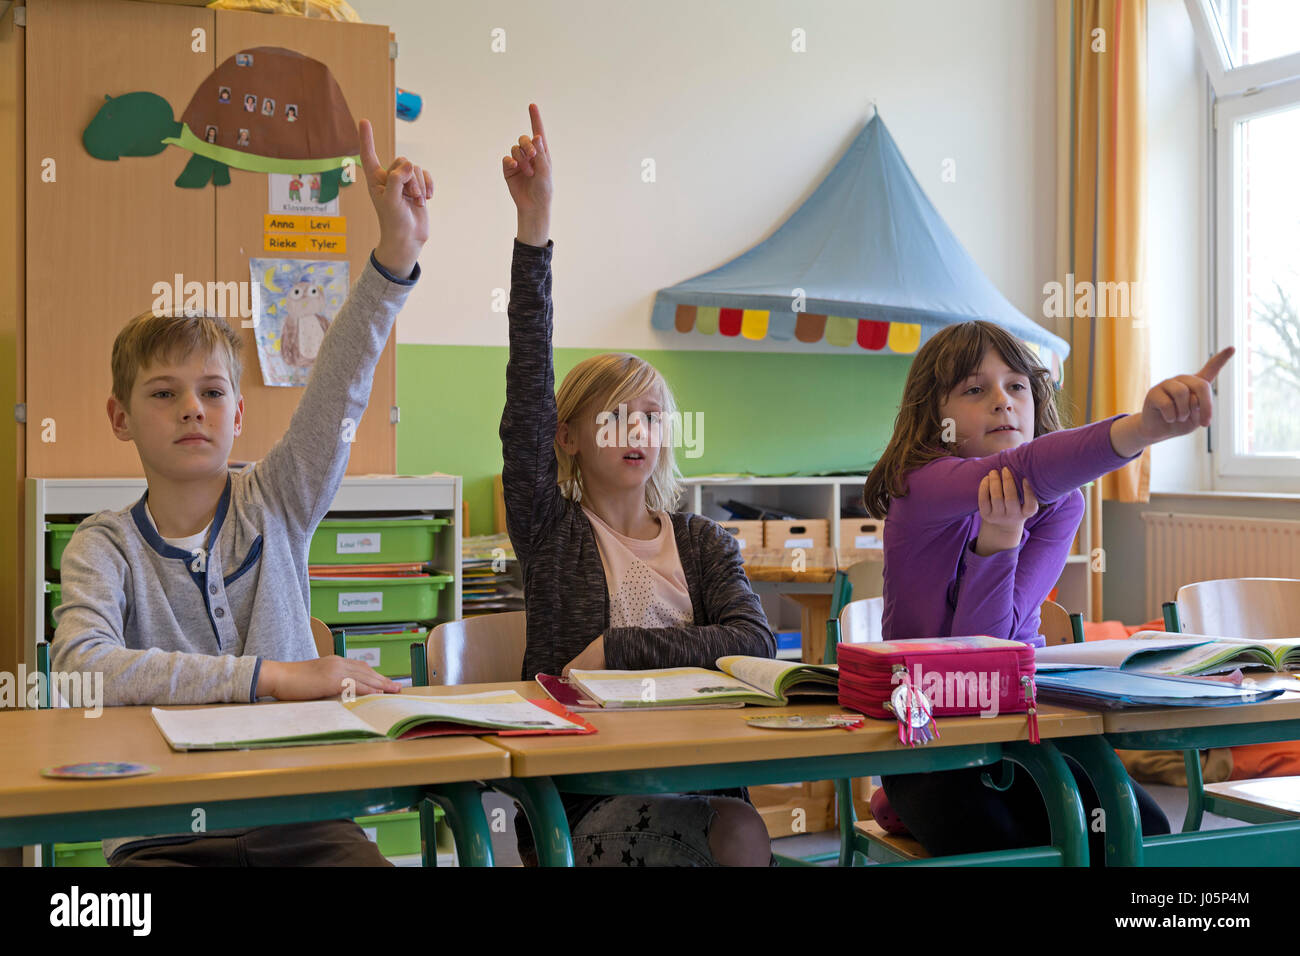 pupils at primary school raising their hands, Lower Saxony, Germany Stock Photo